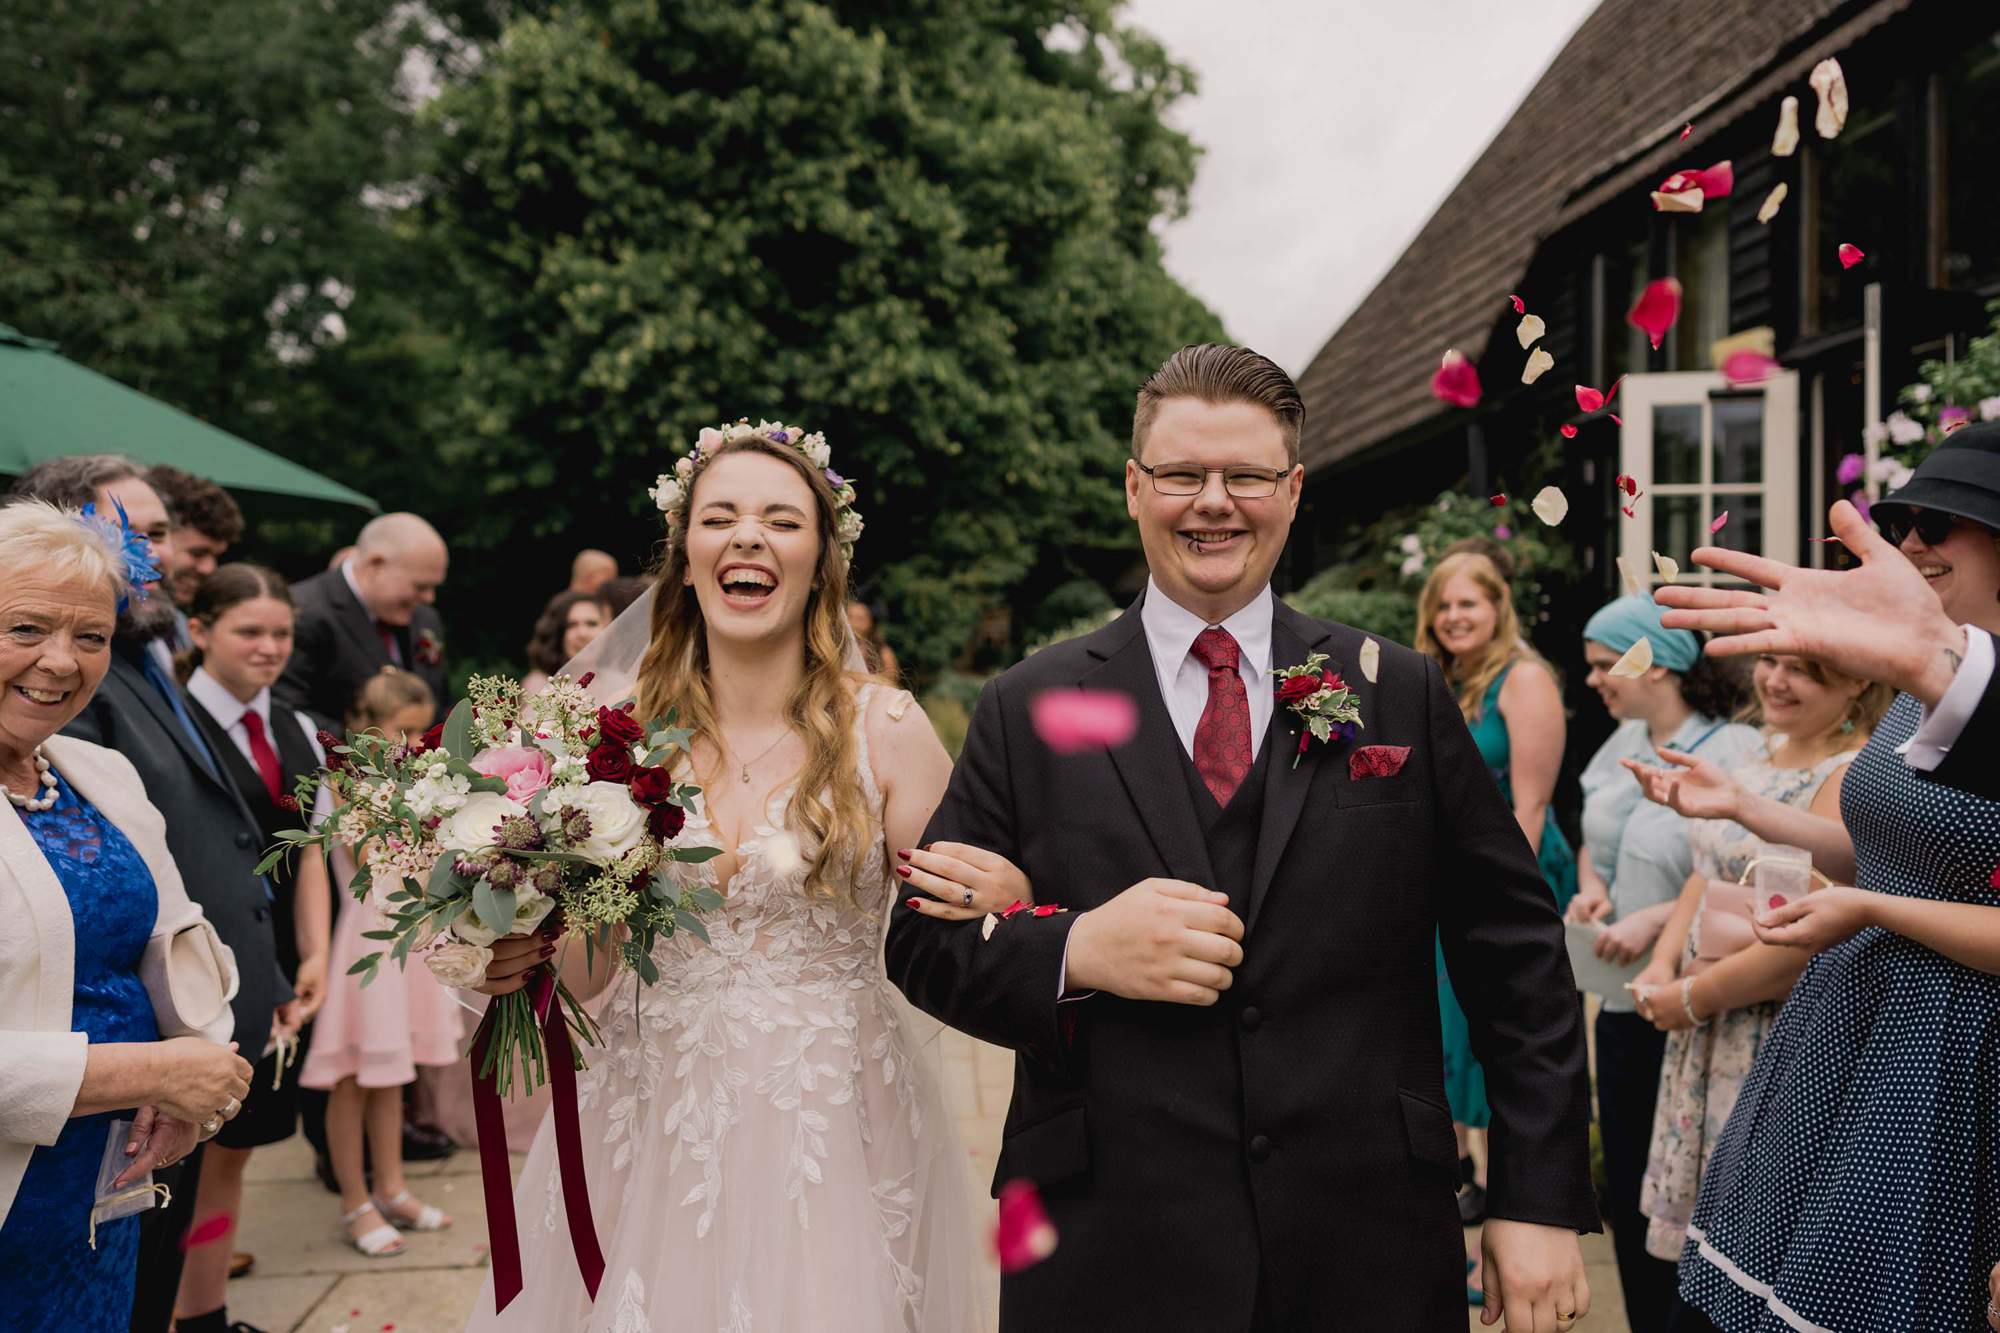 Bride and groom have confetti thrown at them on their wedding day at the Clock Barn venue in Hampshire.